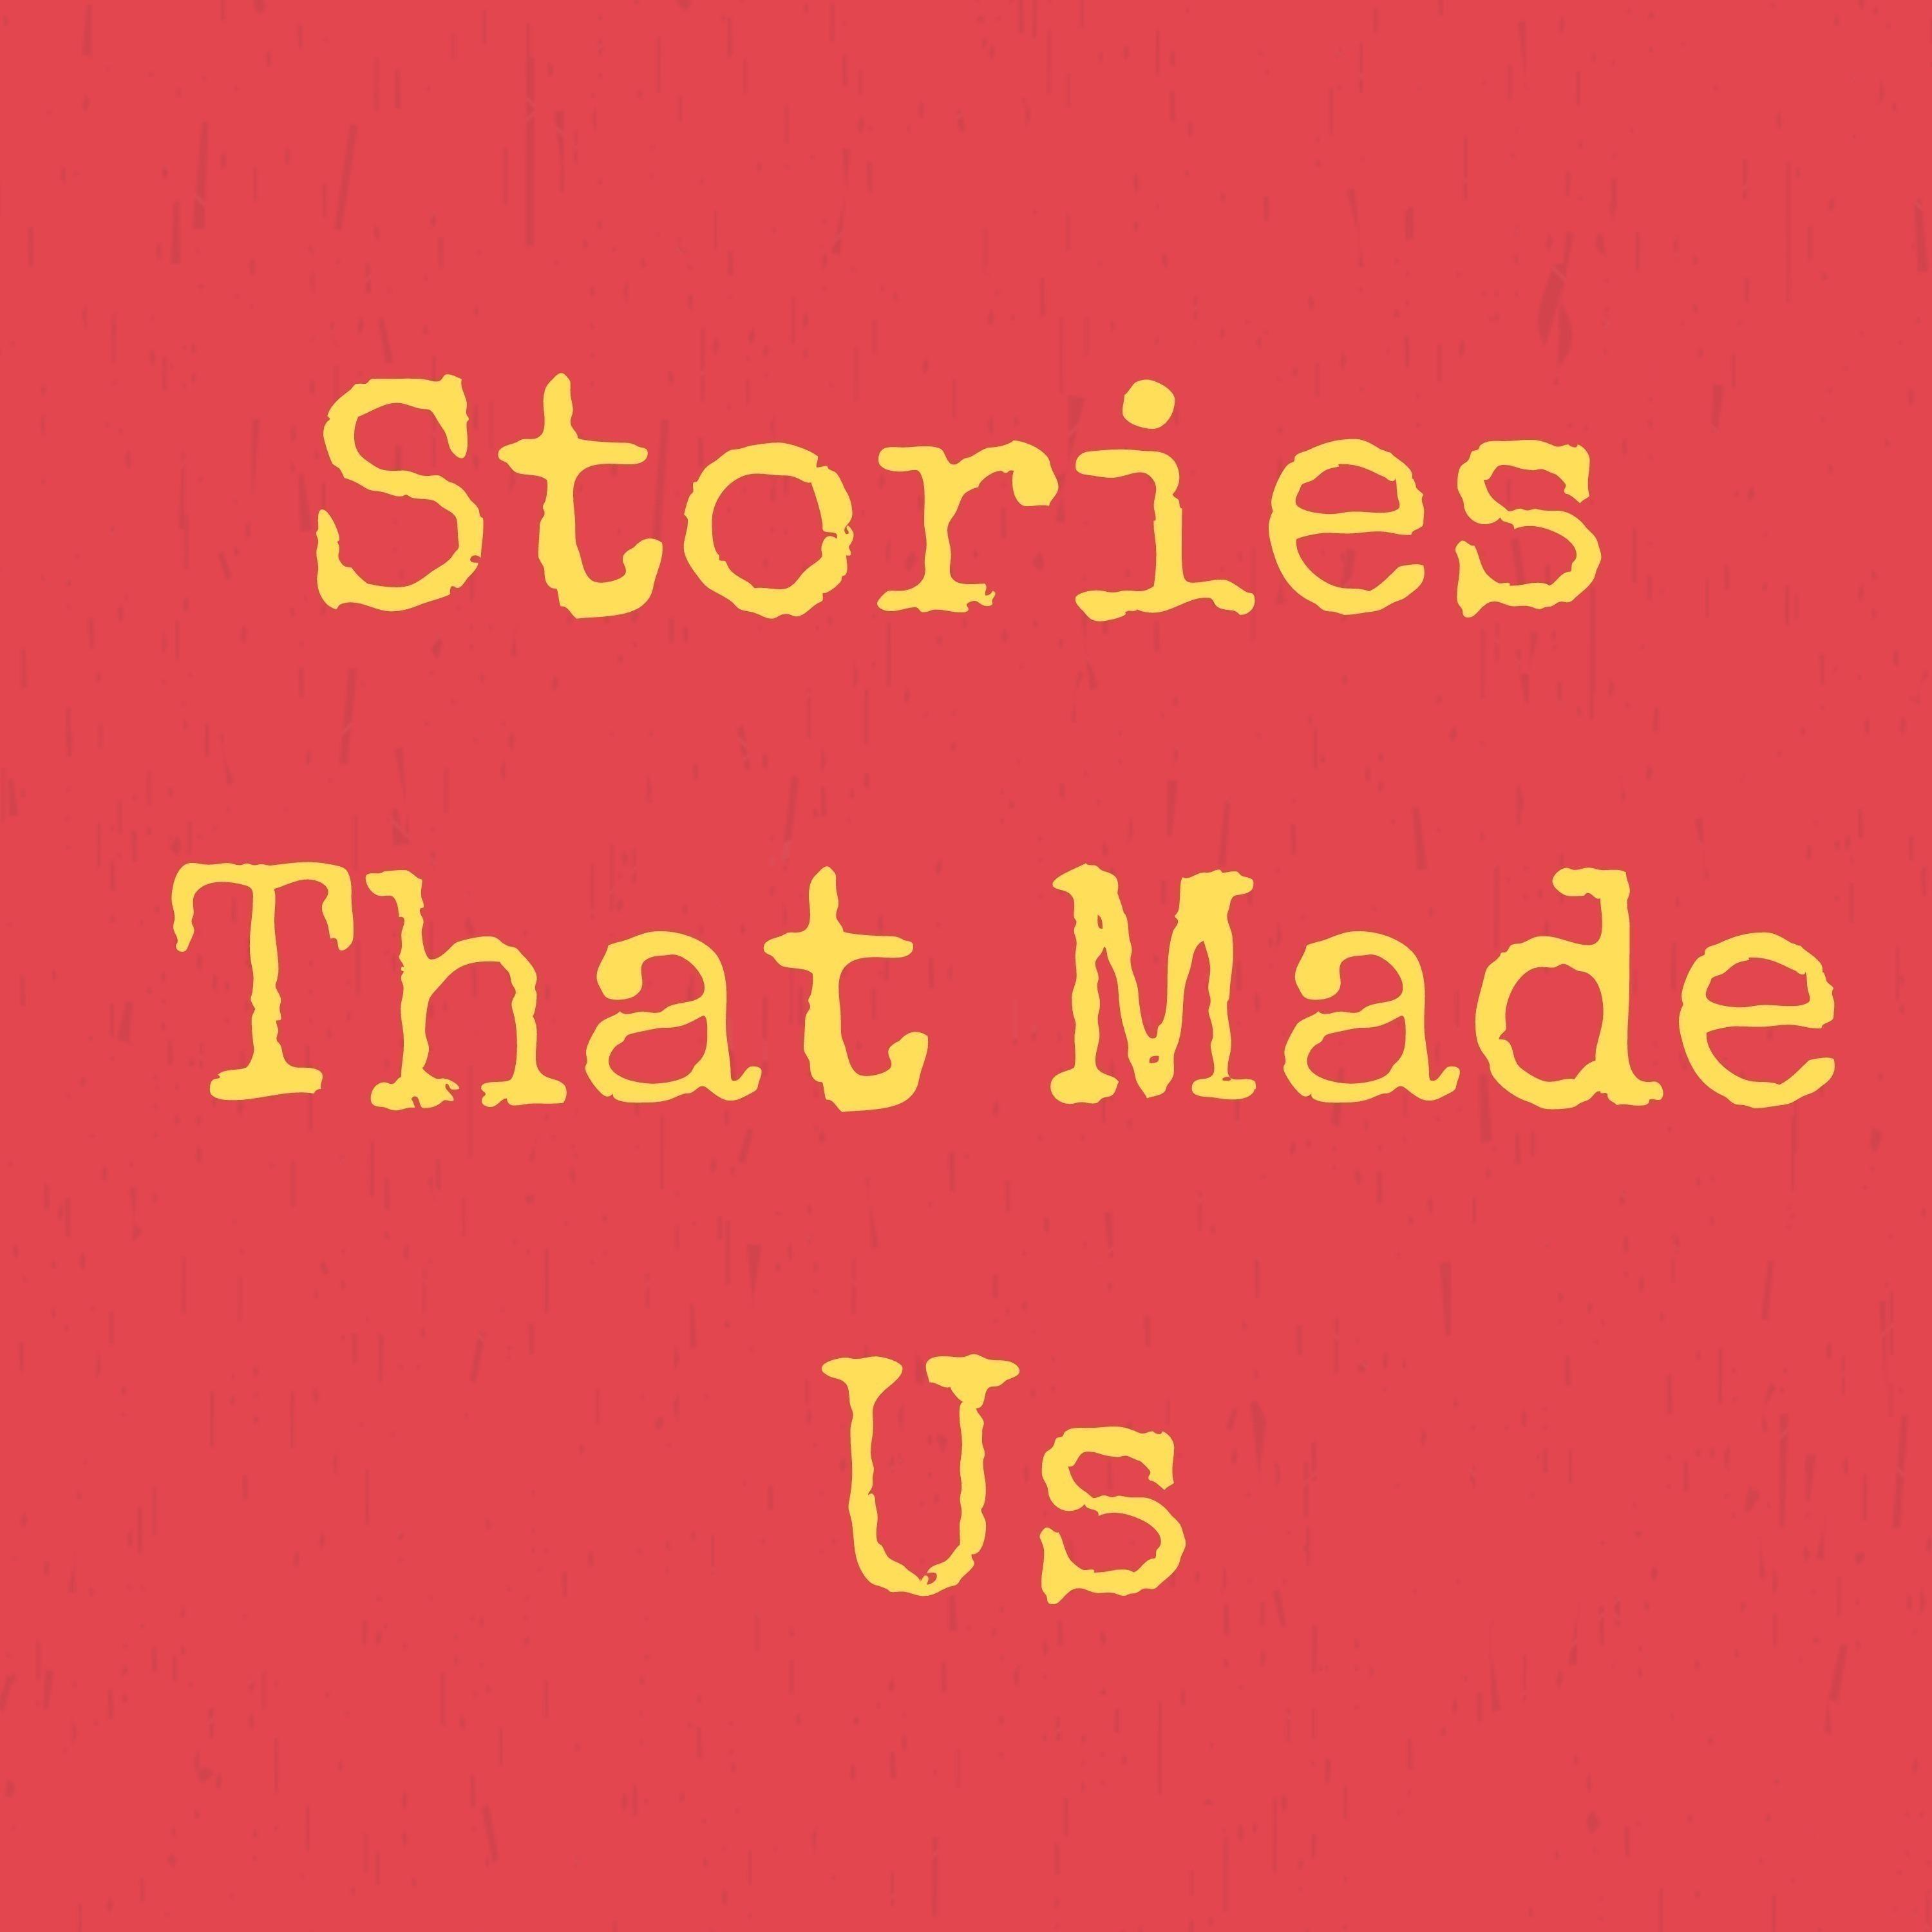 Stories That Made Us